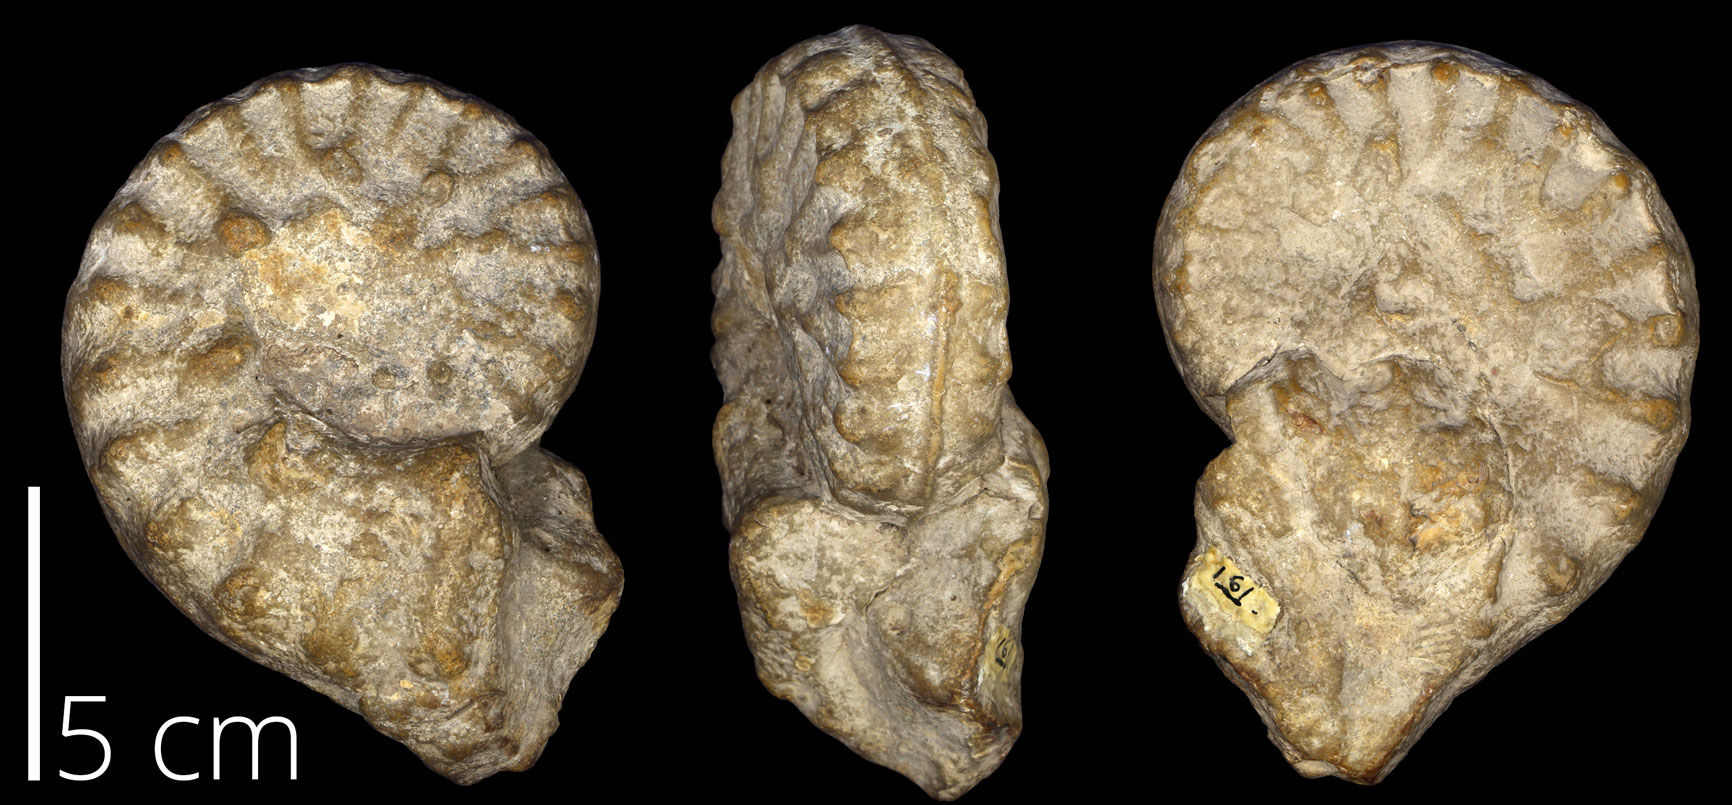 Photographs of an ammonoid showing three views (two sides and the edge with the opening). The shell is coiled and ridged.